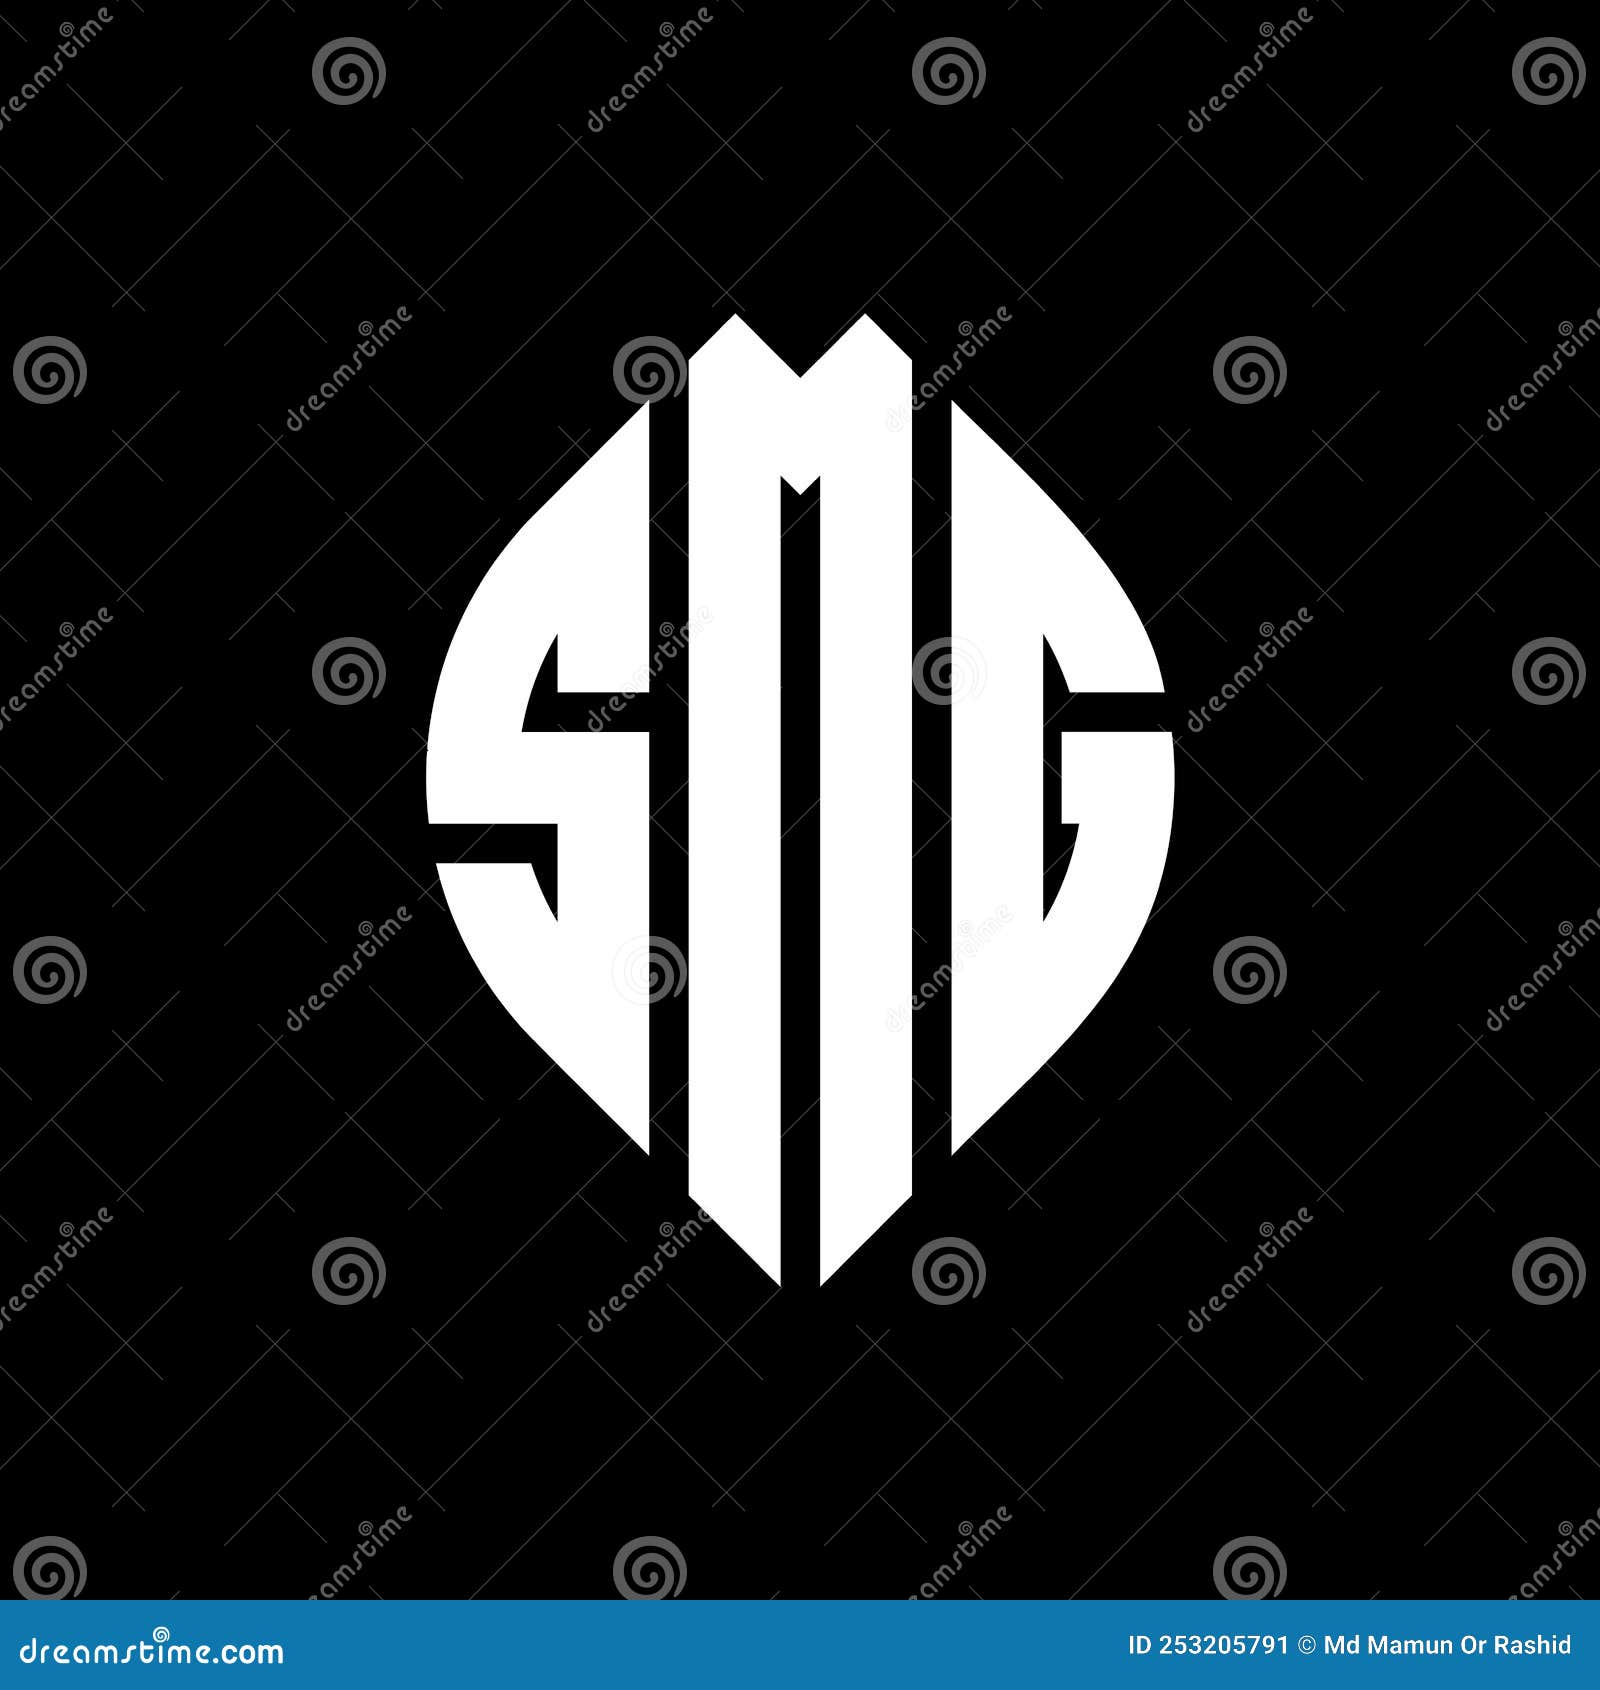 smg circle letter logo  with circle and ellipse . smg ellipse letters with typographic style. the three initials form a